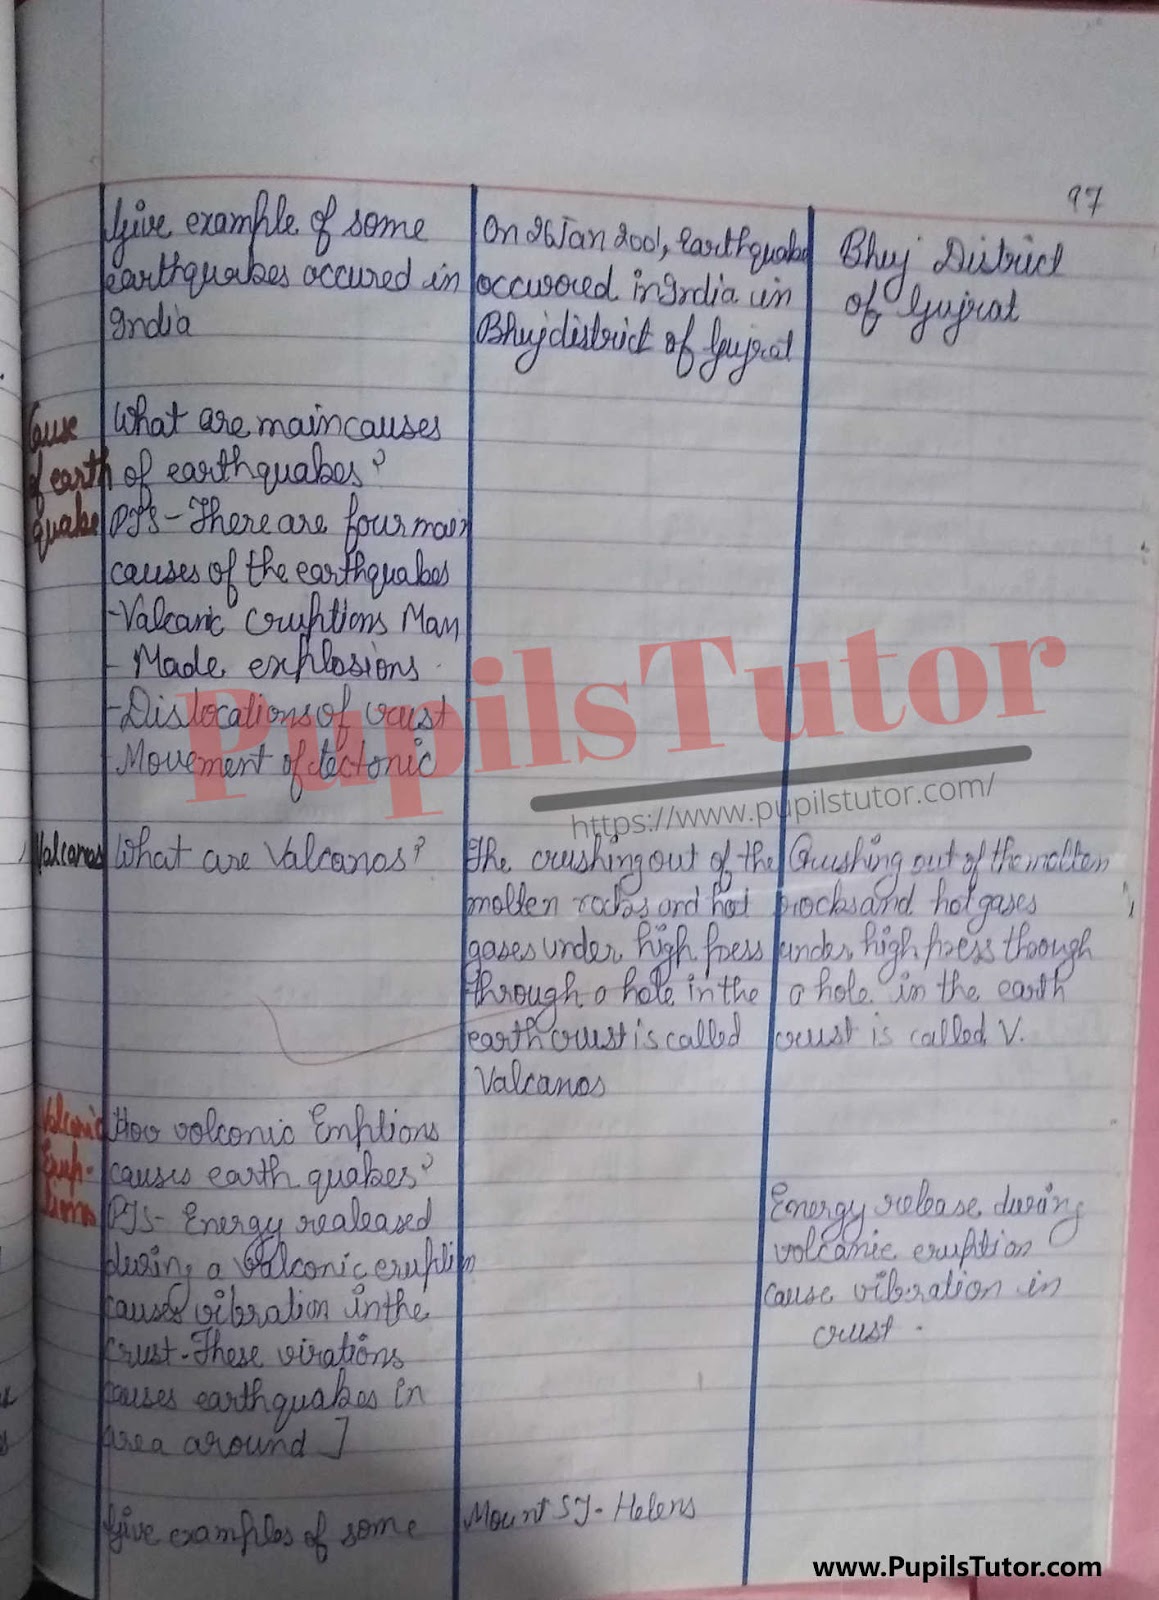 Class/Grade 8 Science Lesson Plan On Earthquake And Its Causes For CBSE NCERT KVS School And University College Teachers – (Page And Image Number 3) – www.pupilstutor.com